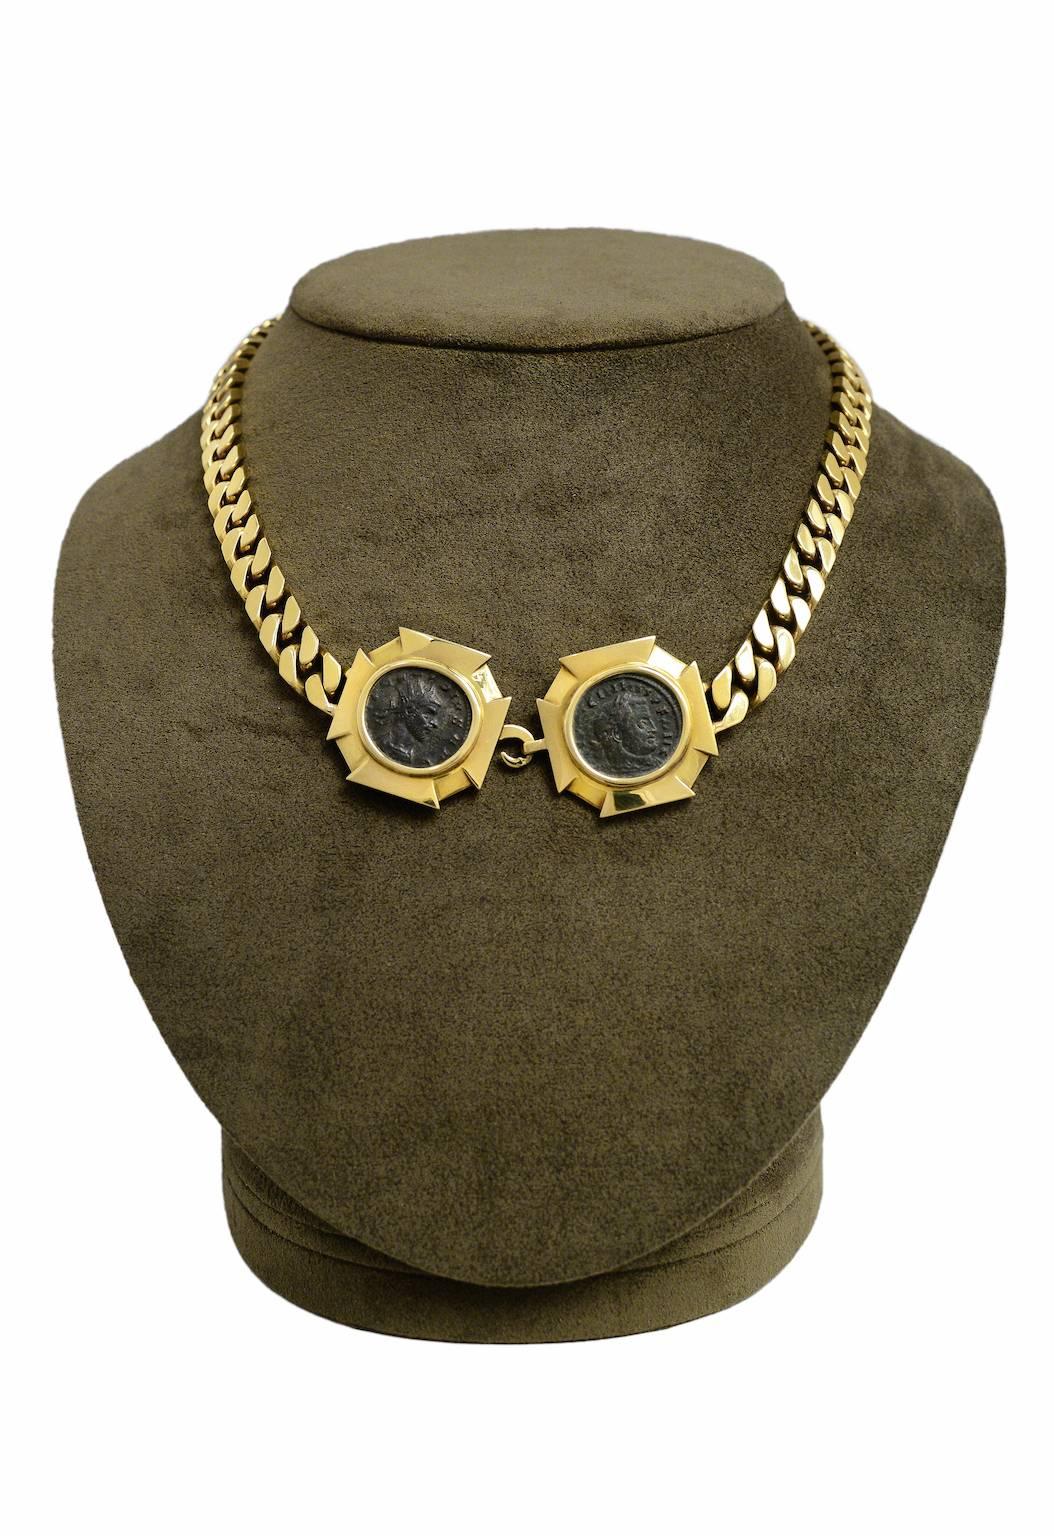 Bulgari Monete double ancient coin necklace with heavy gold curb-link chain. The coins date 307 - 325 and 260 - 270 AD. Stamped BULGARI ITALY on clasp. Necklace circa 1970's.

*Please contact for addition images or information. 